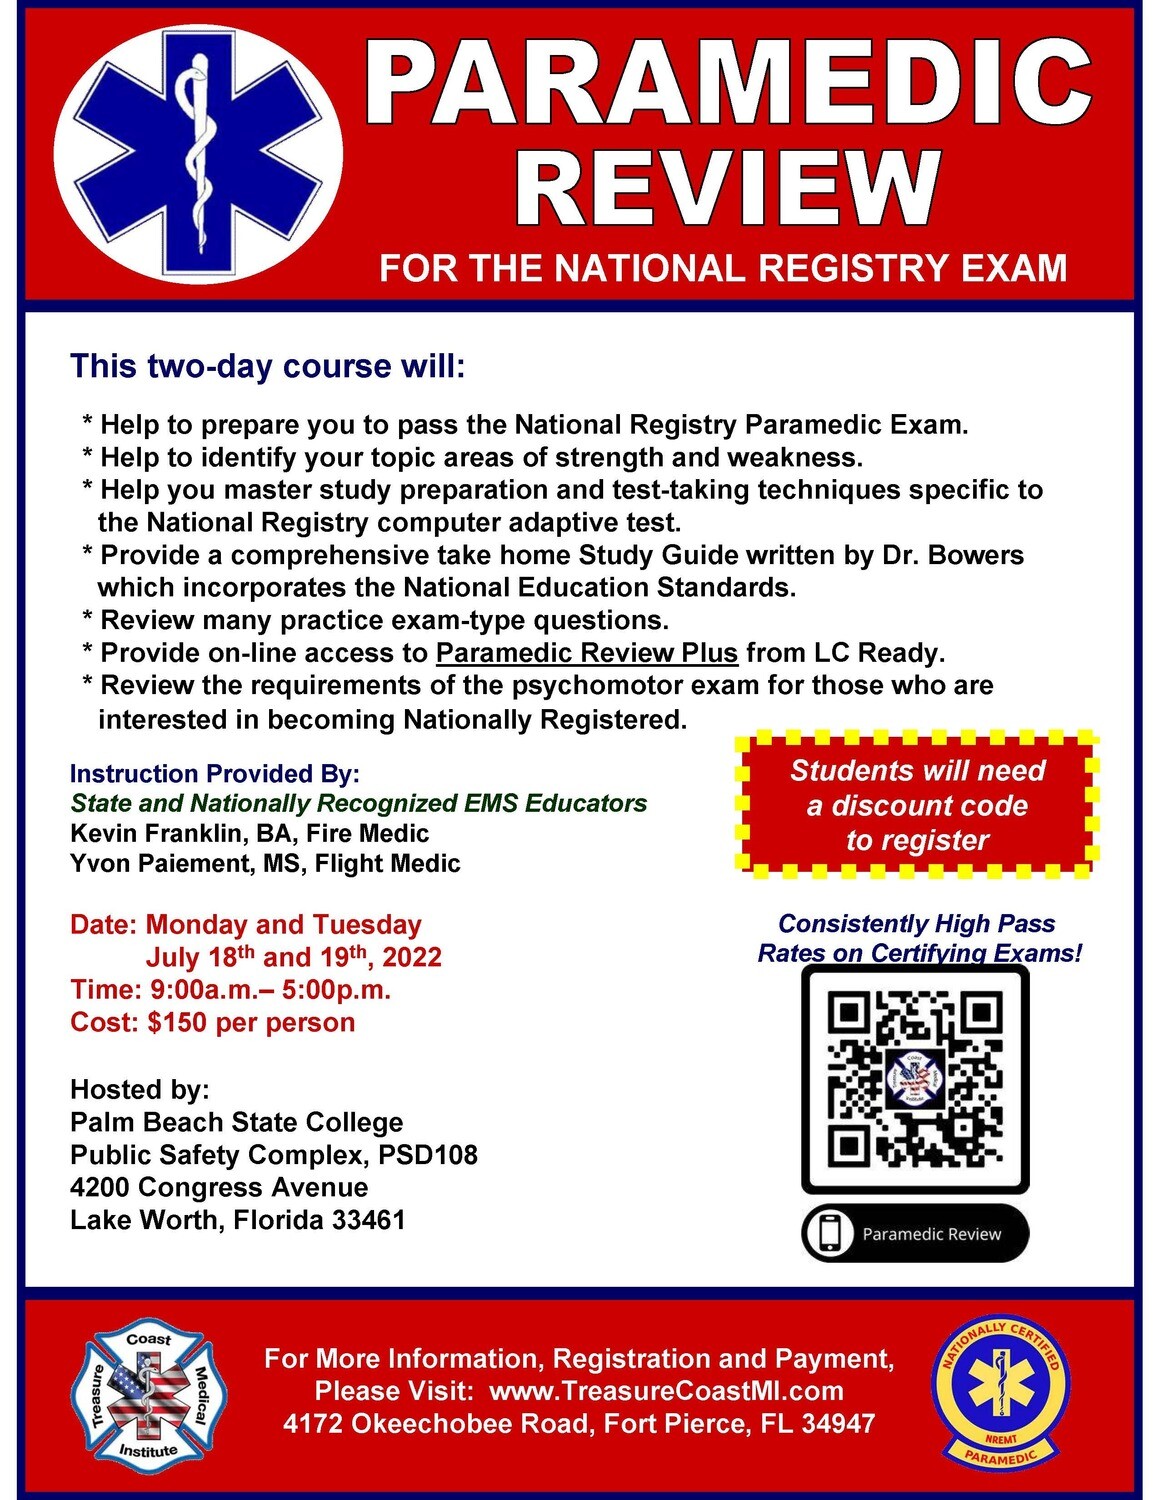 National Registry Paramedic Exam Review July 18th and 19th Palm Beach State College (must use discount code when registering)